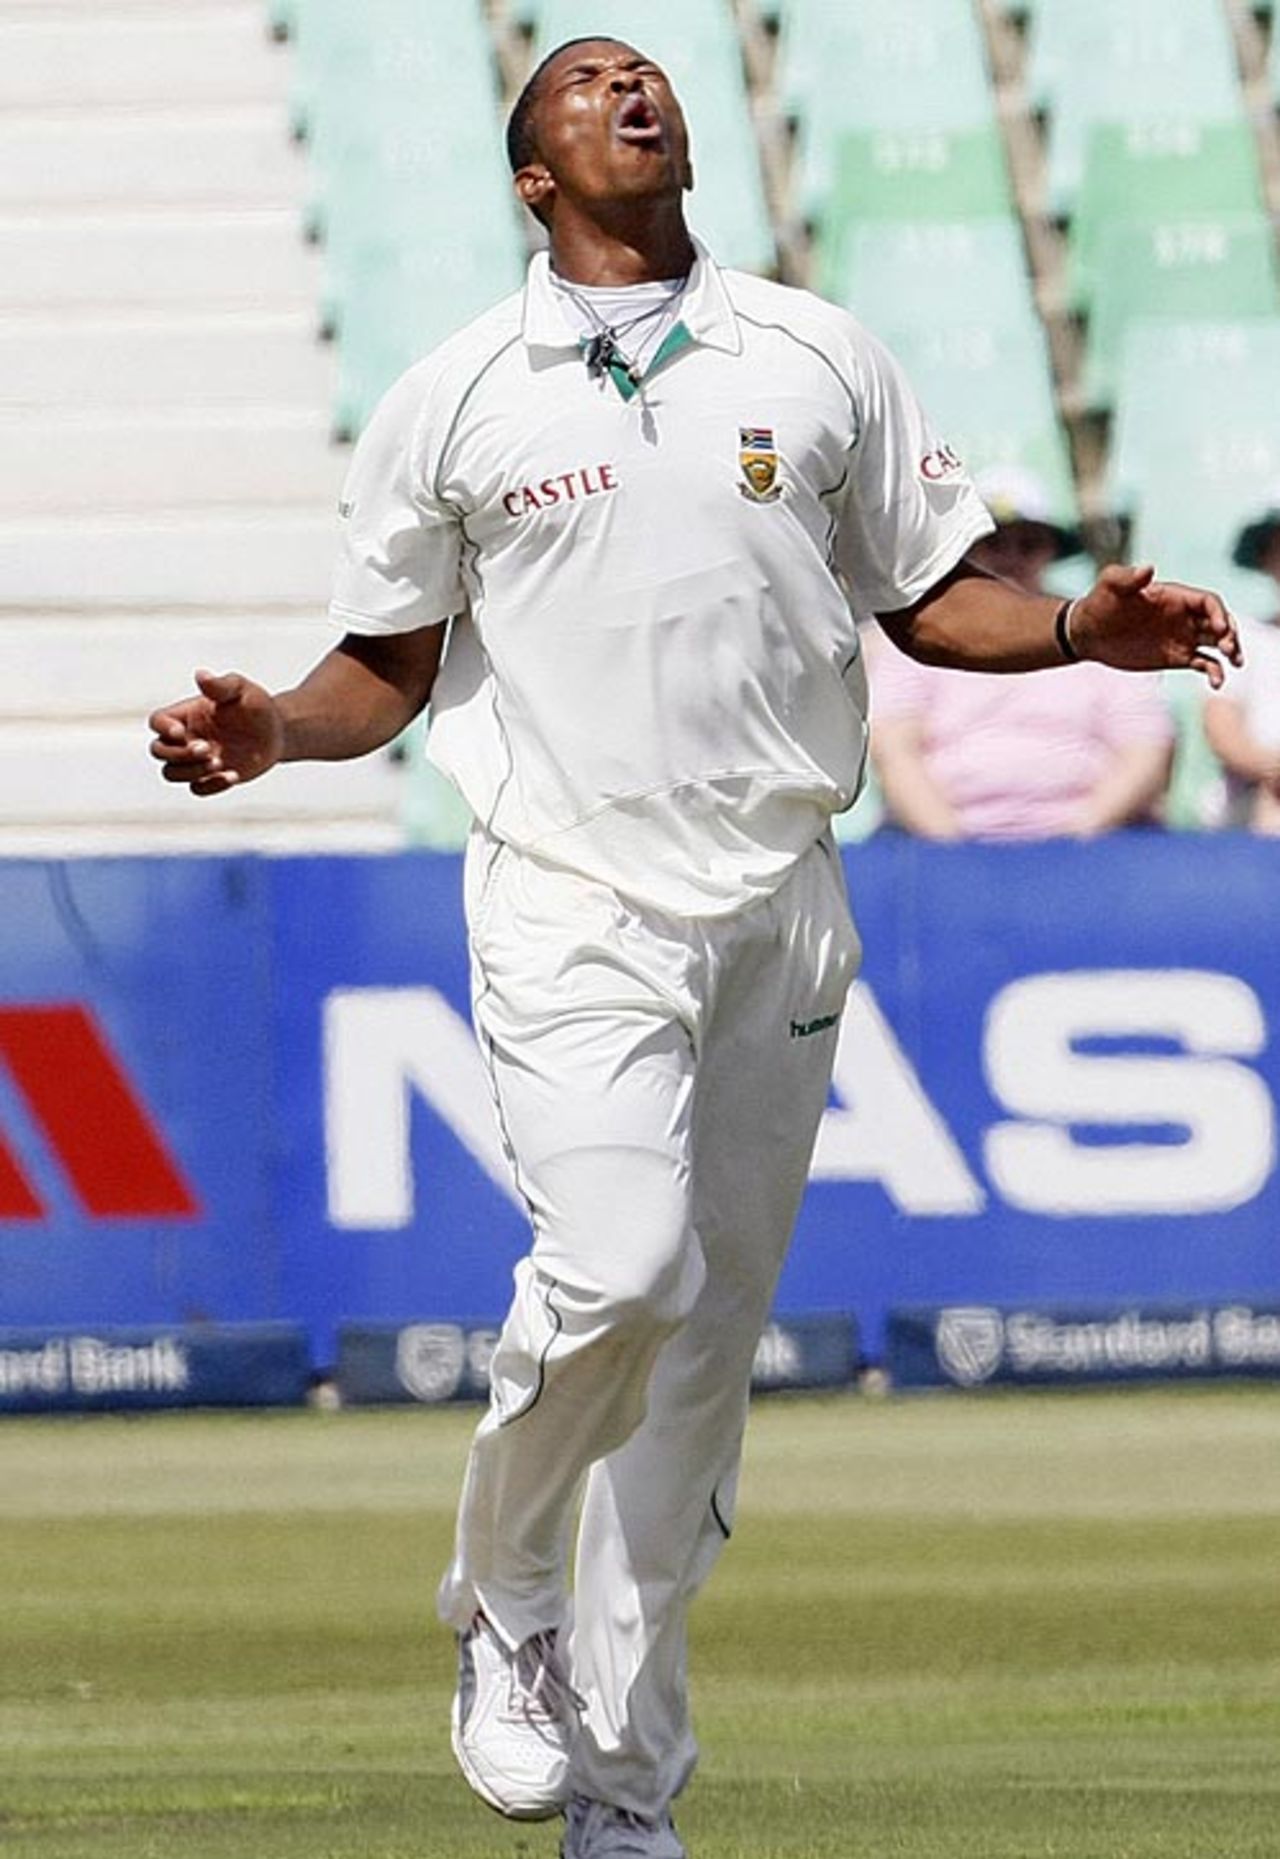 Makhaya Ntini in action, South Africa v Australia, 2nd Test, Durban, 1st day, March 6, 2009